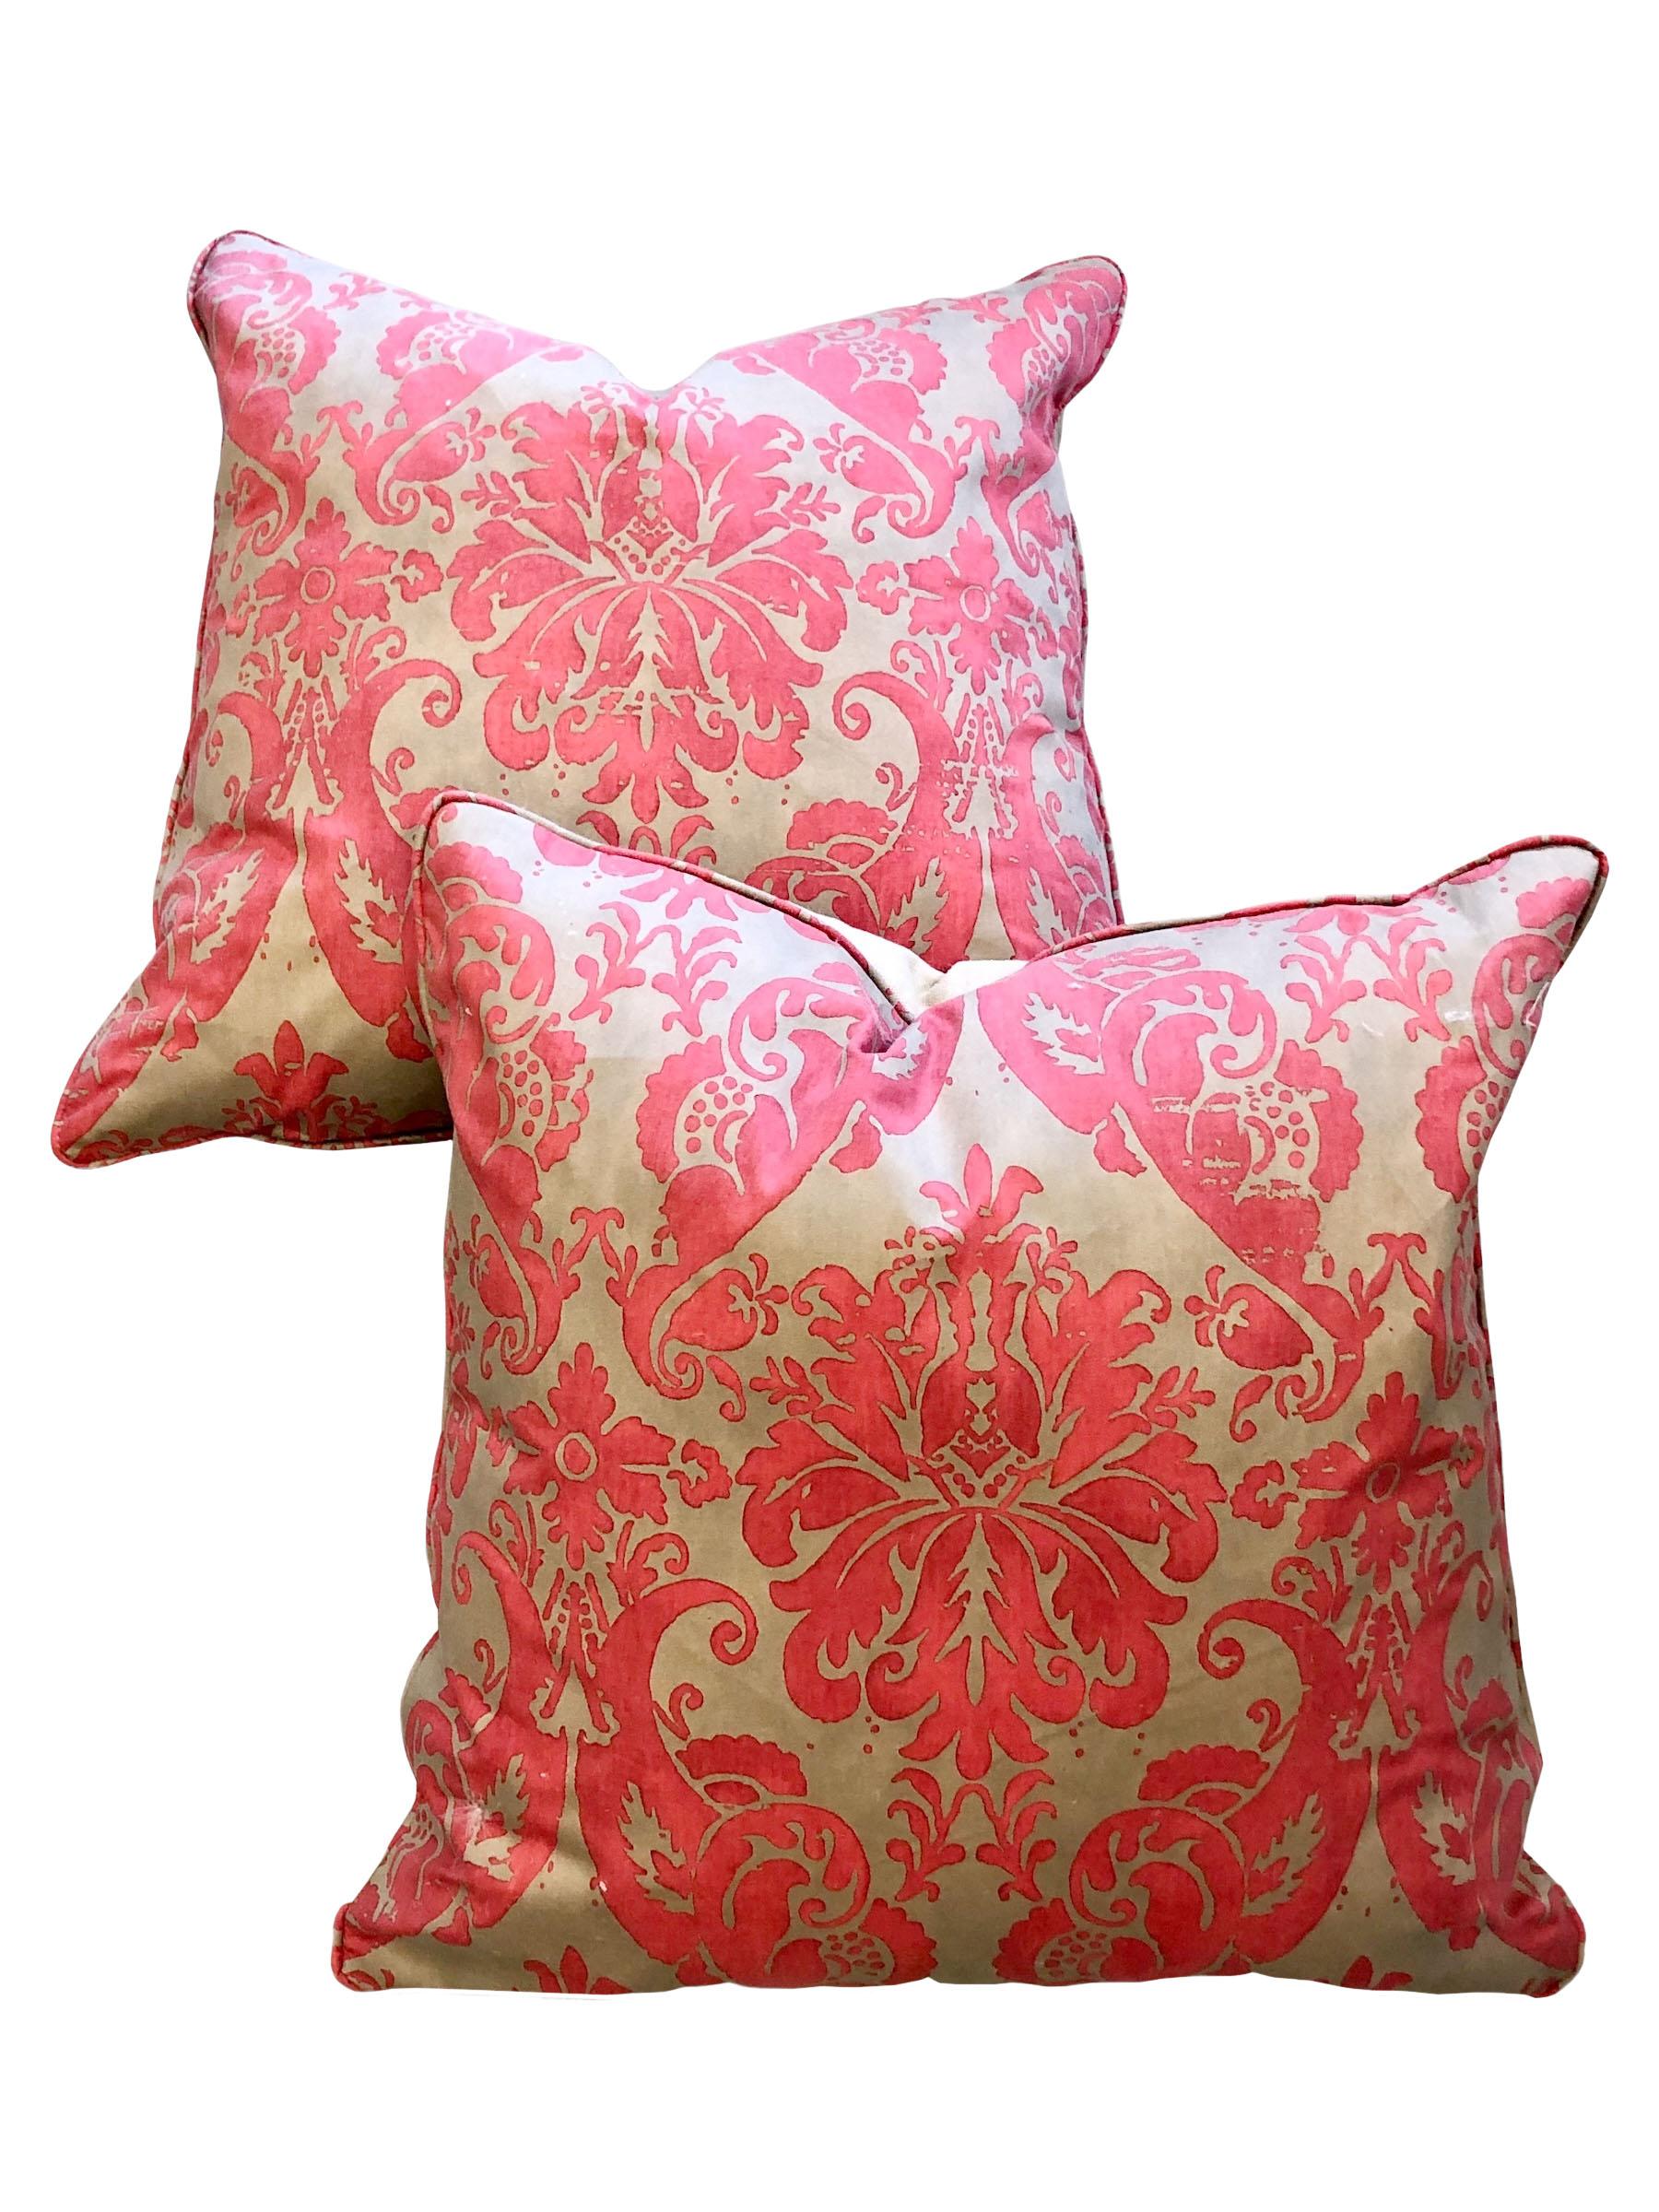 Italian Pink Fortuny Pillows, a Pair 1